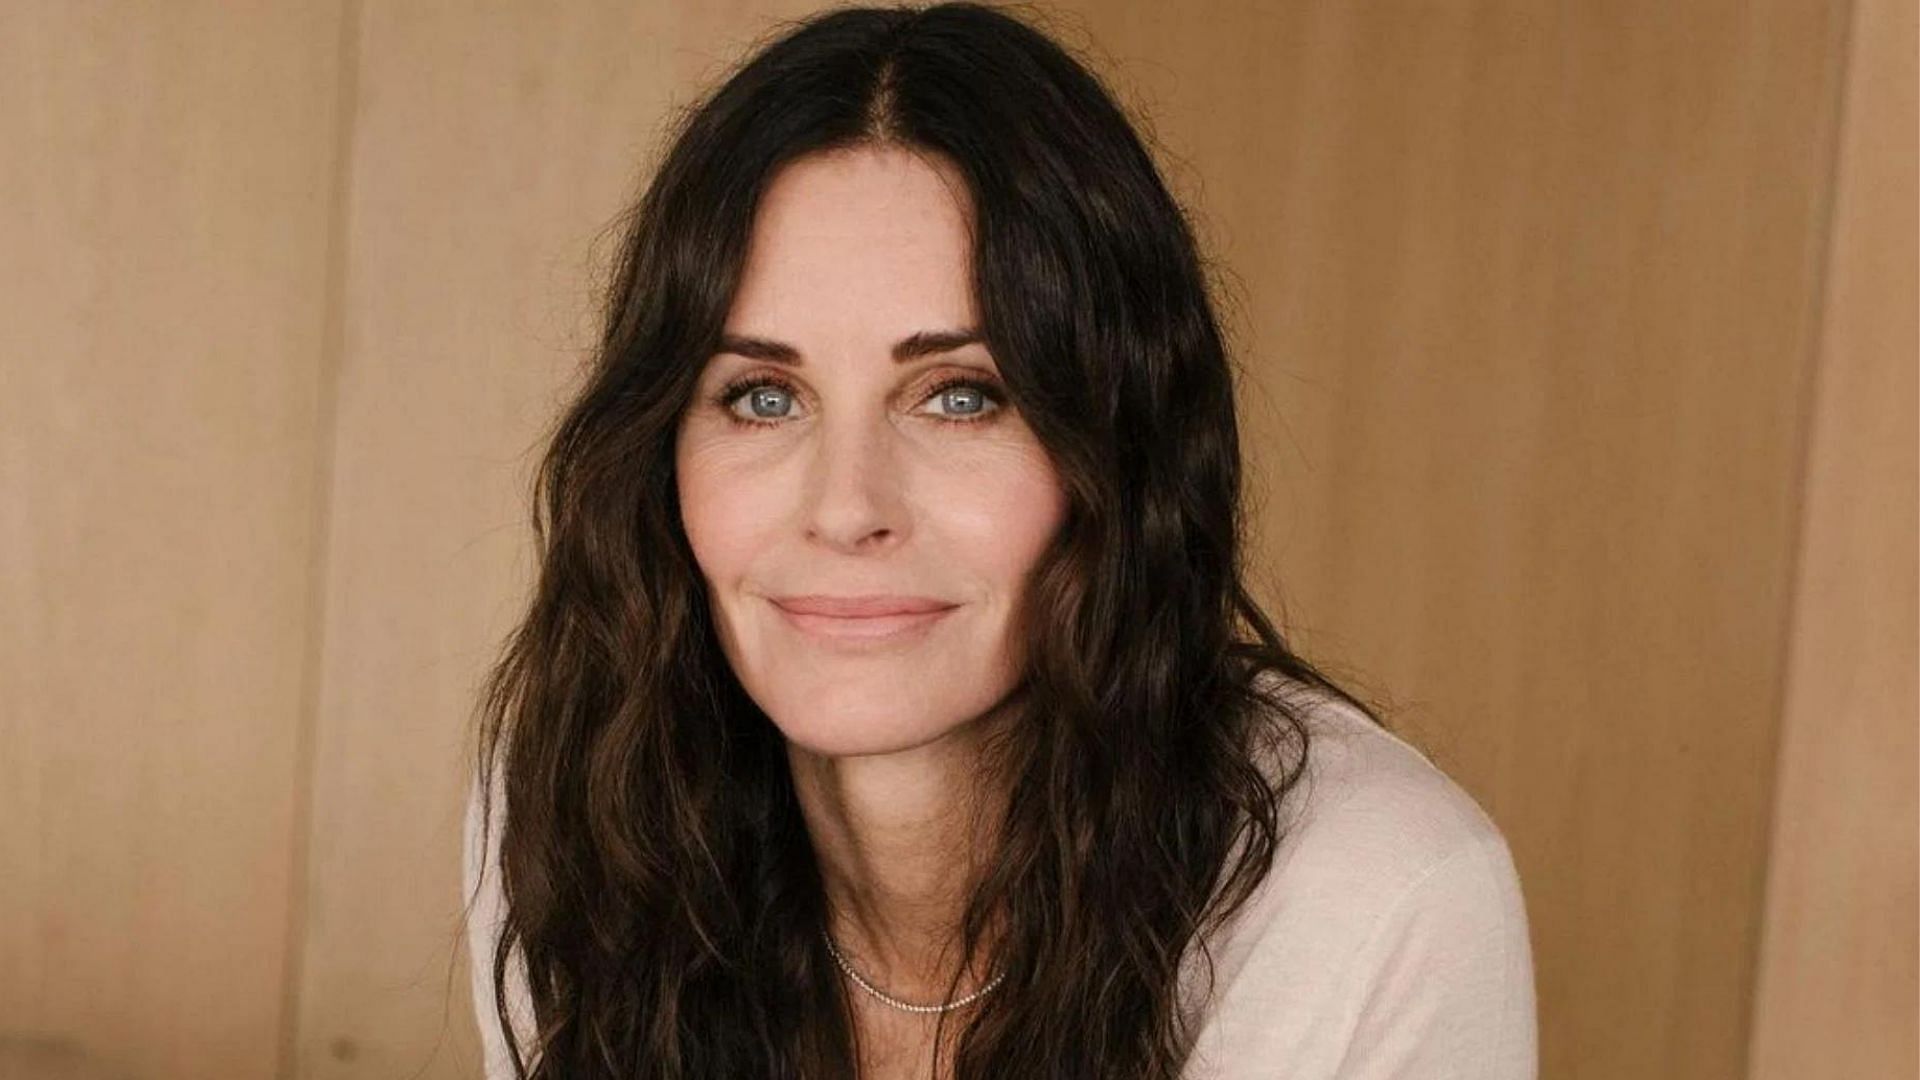 Courtney Cox tries out new Friends filter (Image via Twitter)